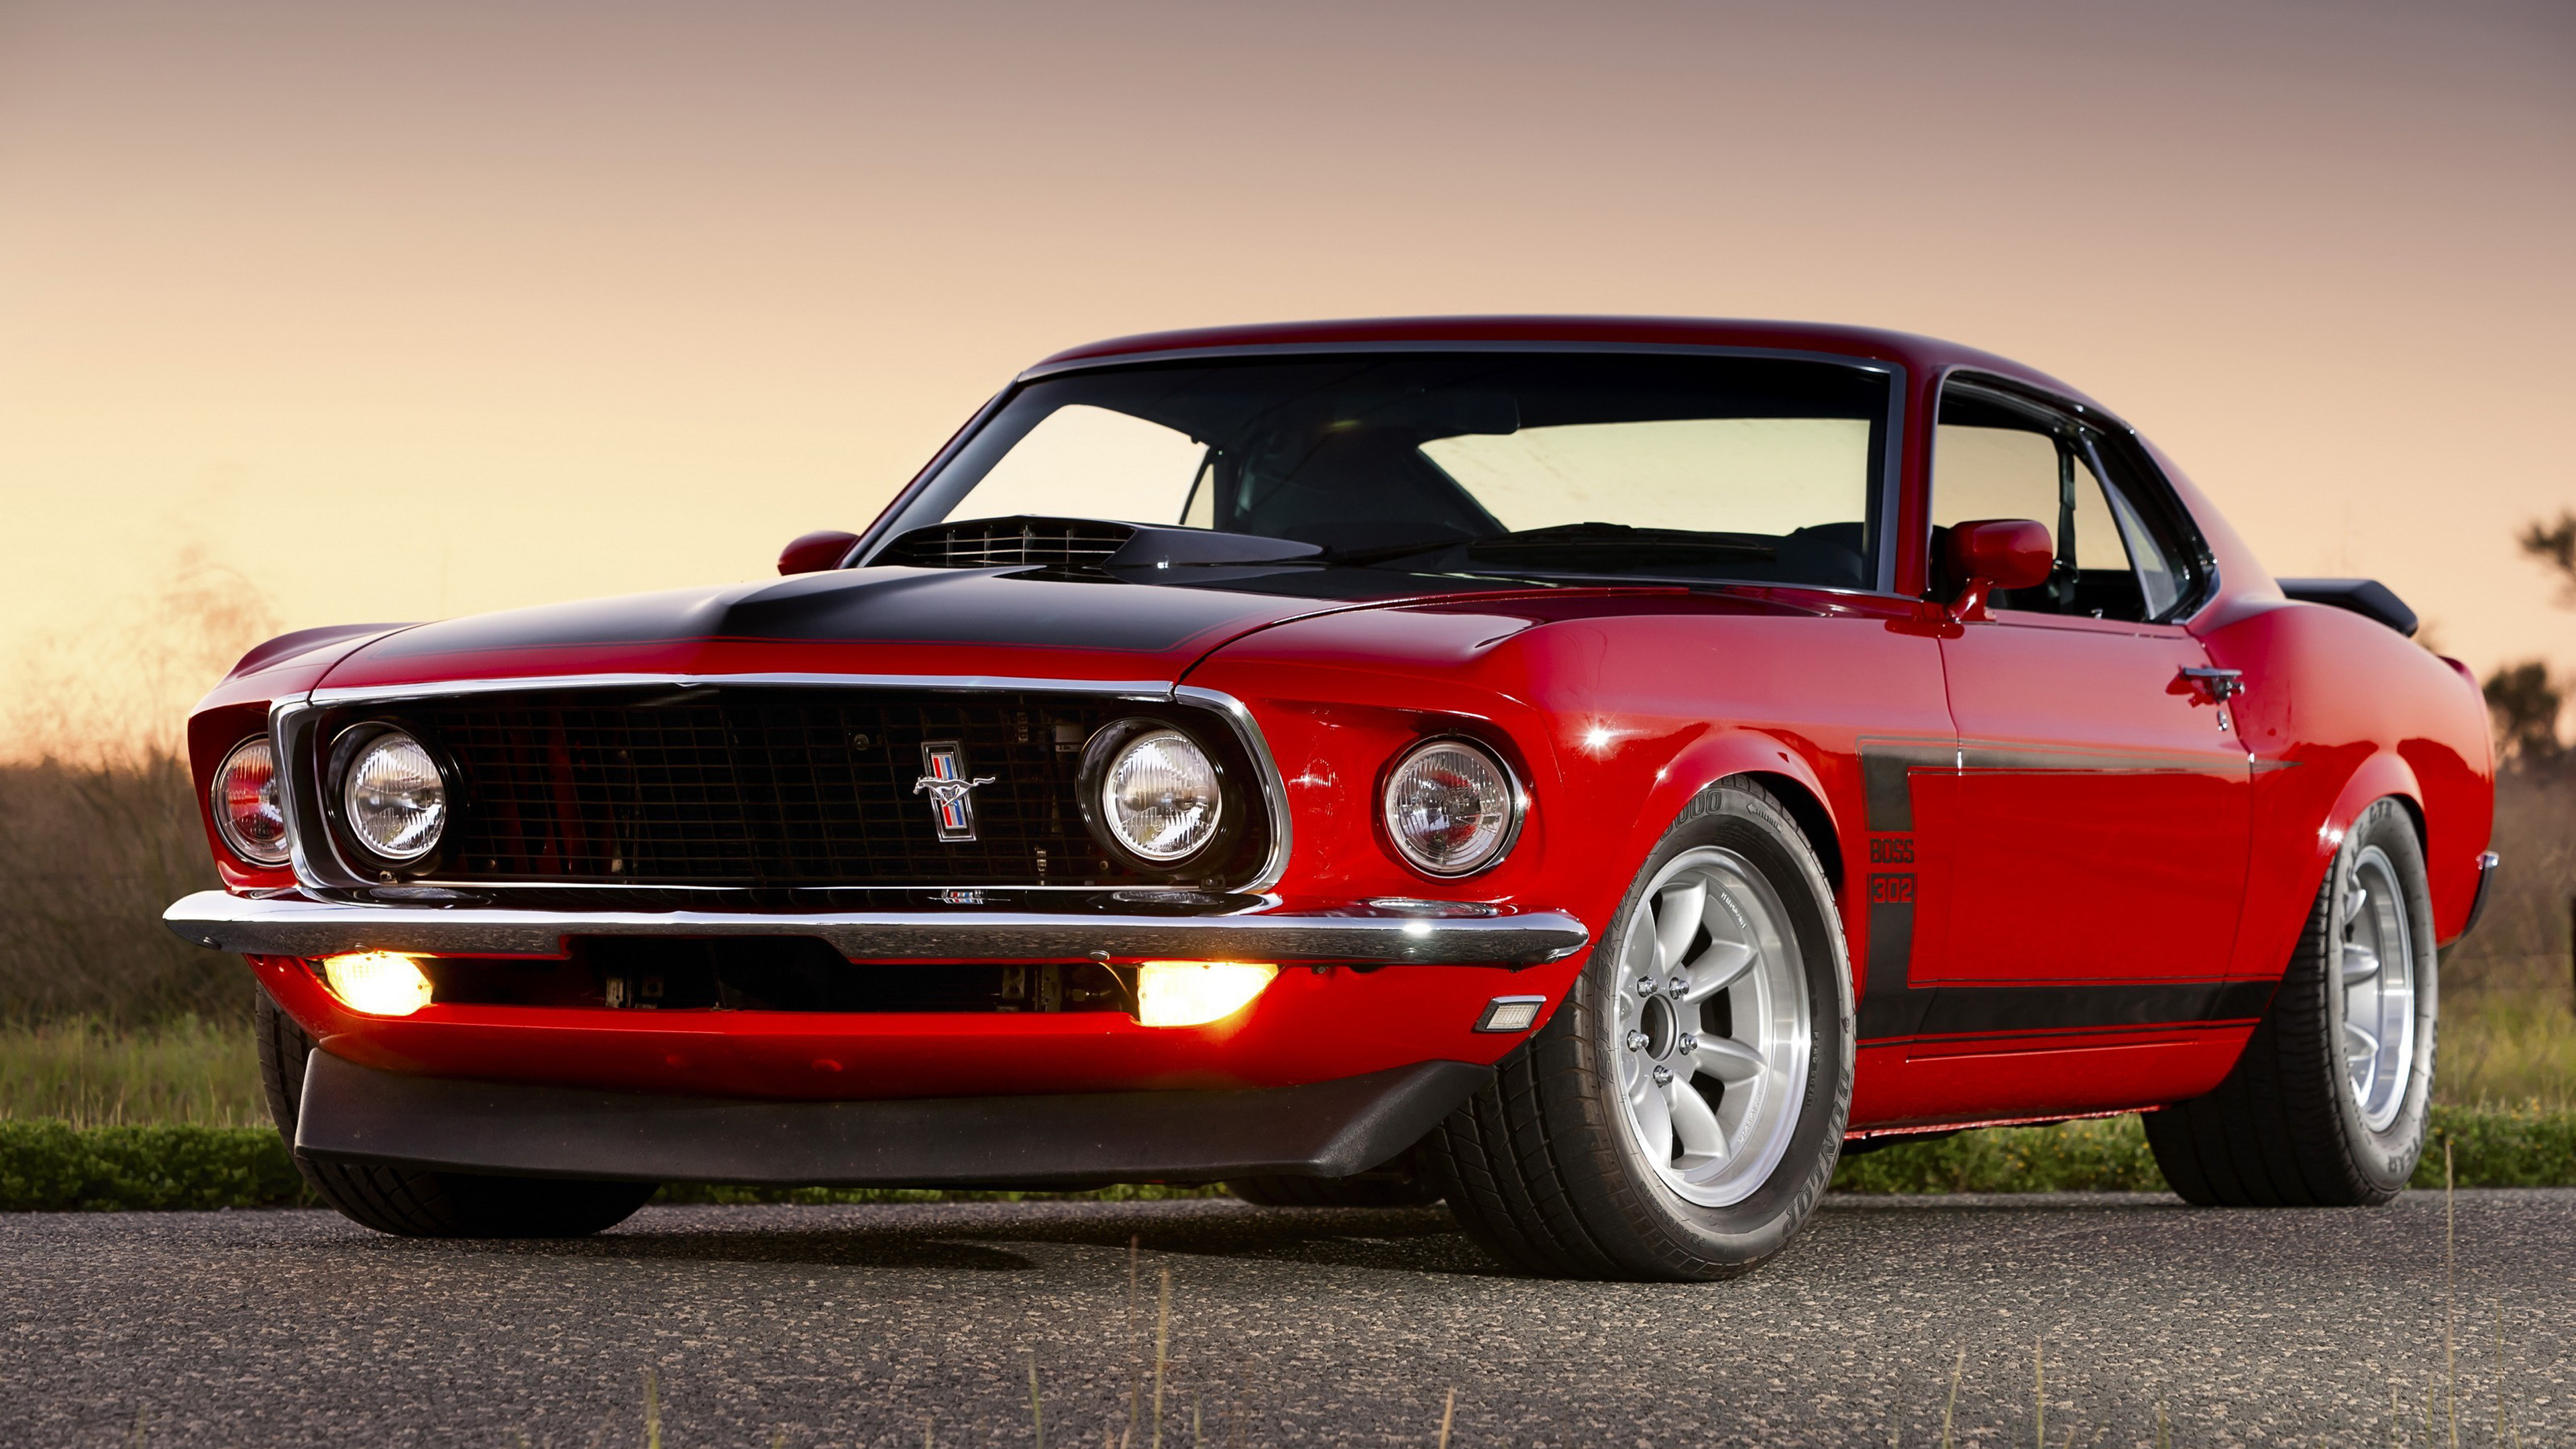 Ford Mustang: Boss 429, Recognized as being among some of the rarest and highly valued muscle cars. 3840x2160 4K Background.